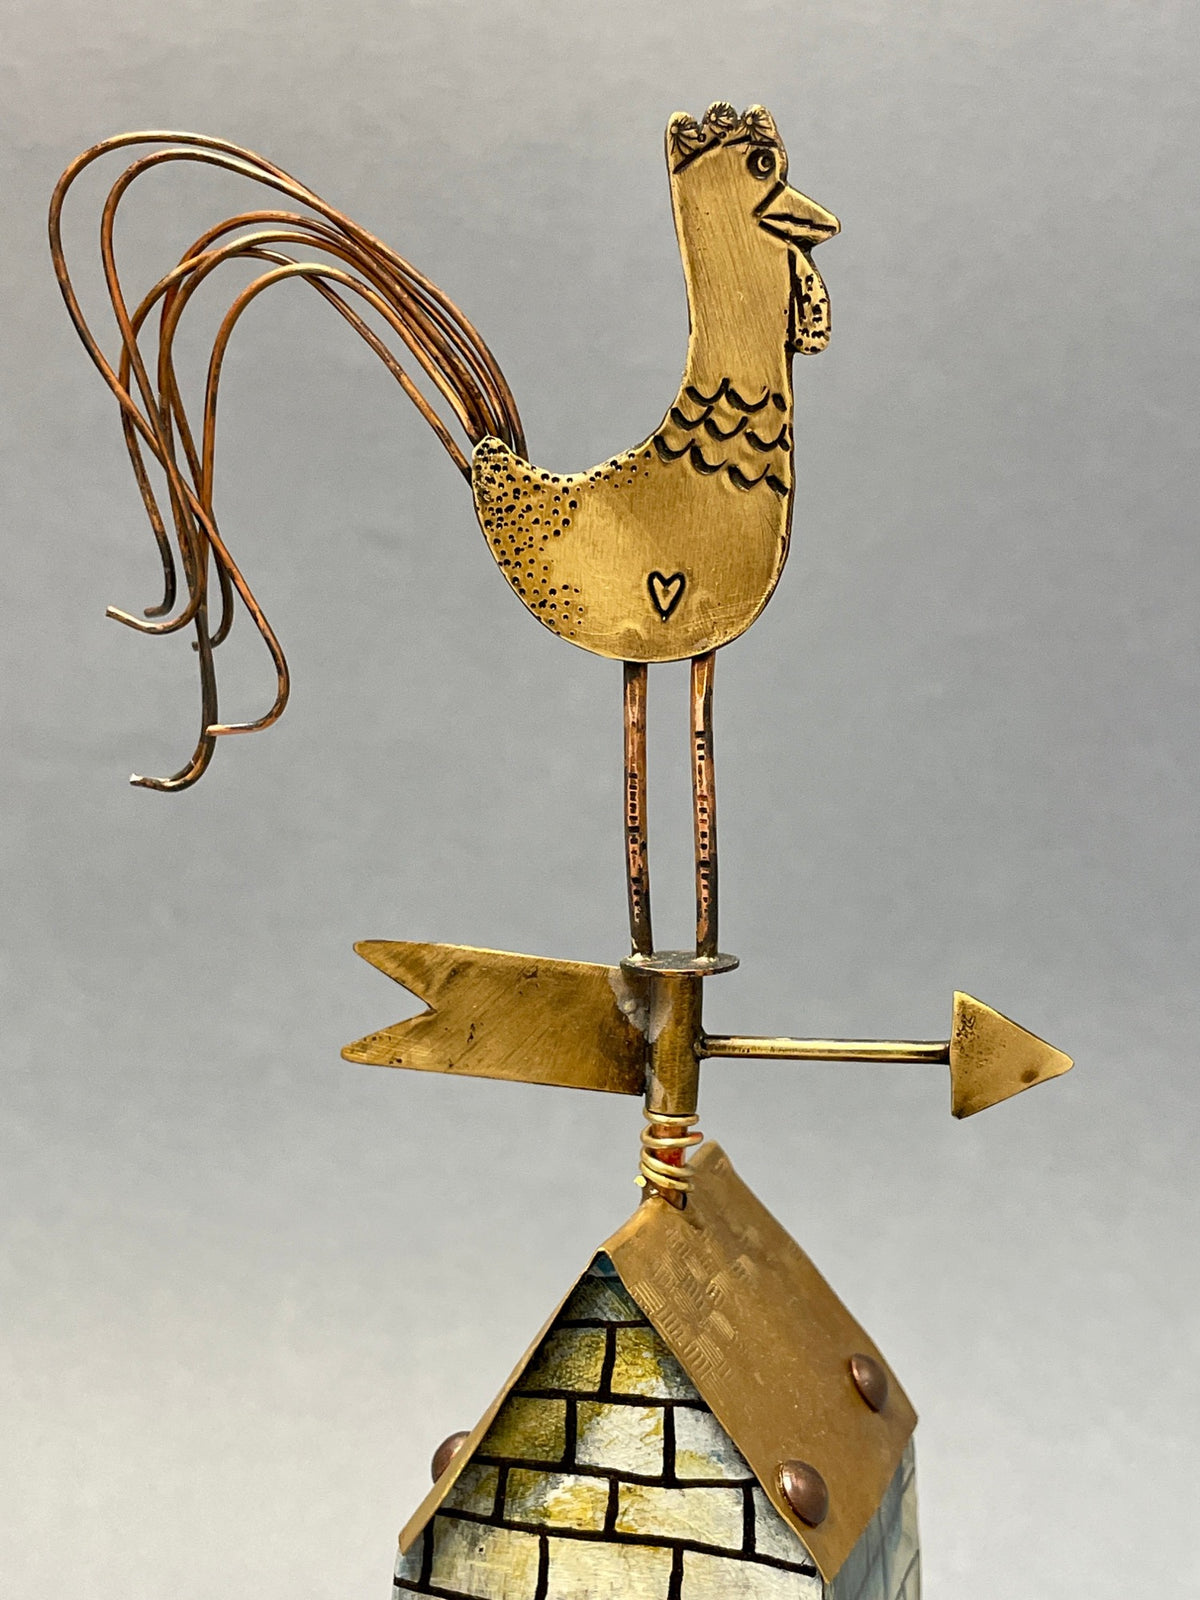 Weather Vane Tower with cockeral by Frances Noon